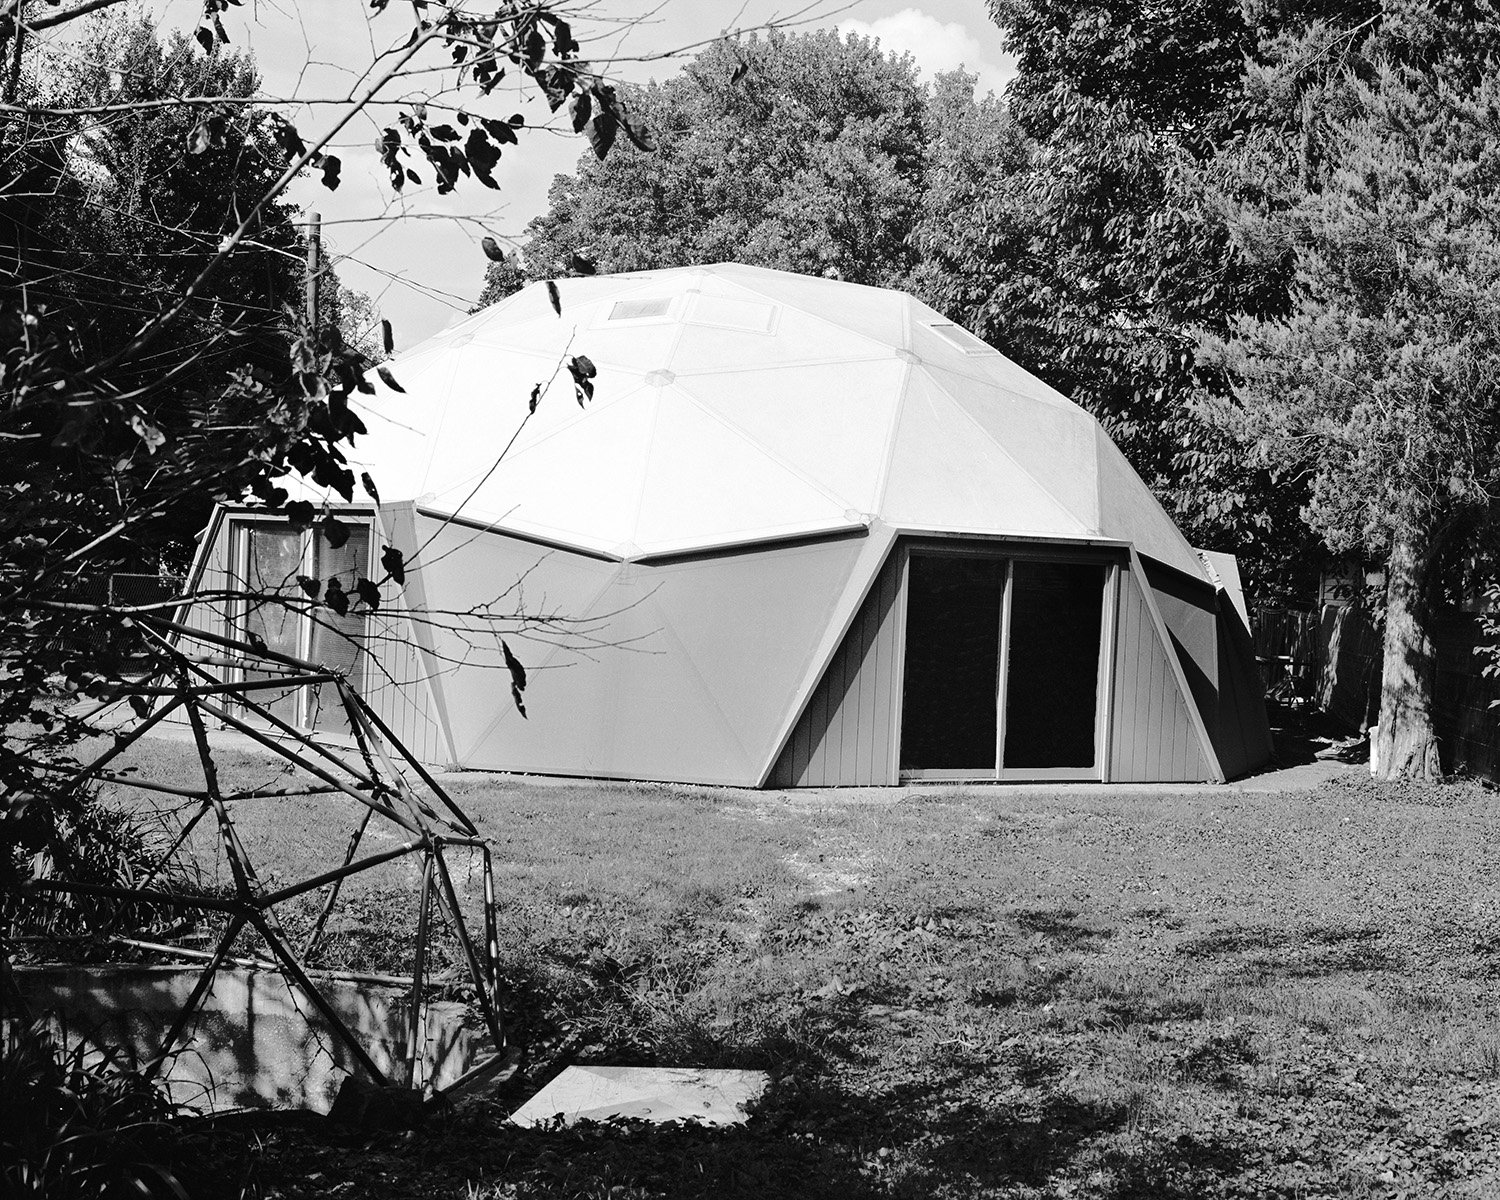 R. Buckminster Fuller and Anne Hewlett Dome Home, Carbondale, Illinois